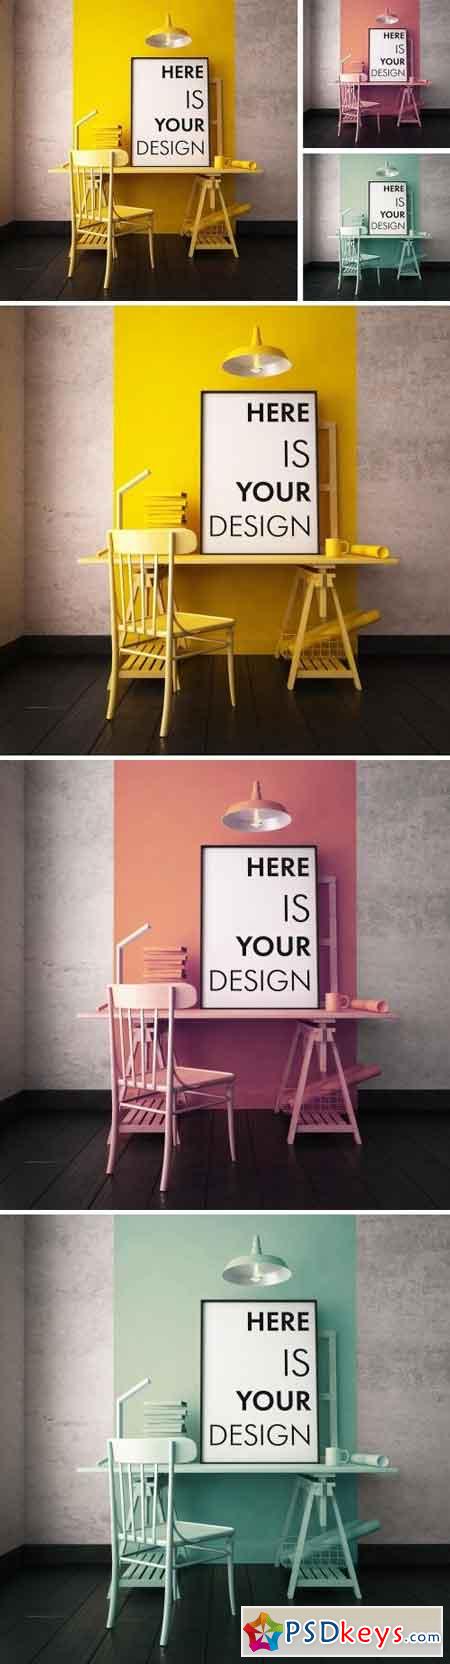 3 color interior with mockup poster 1590929